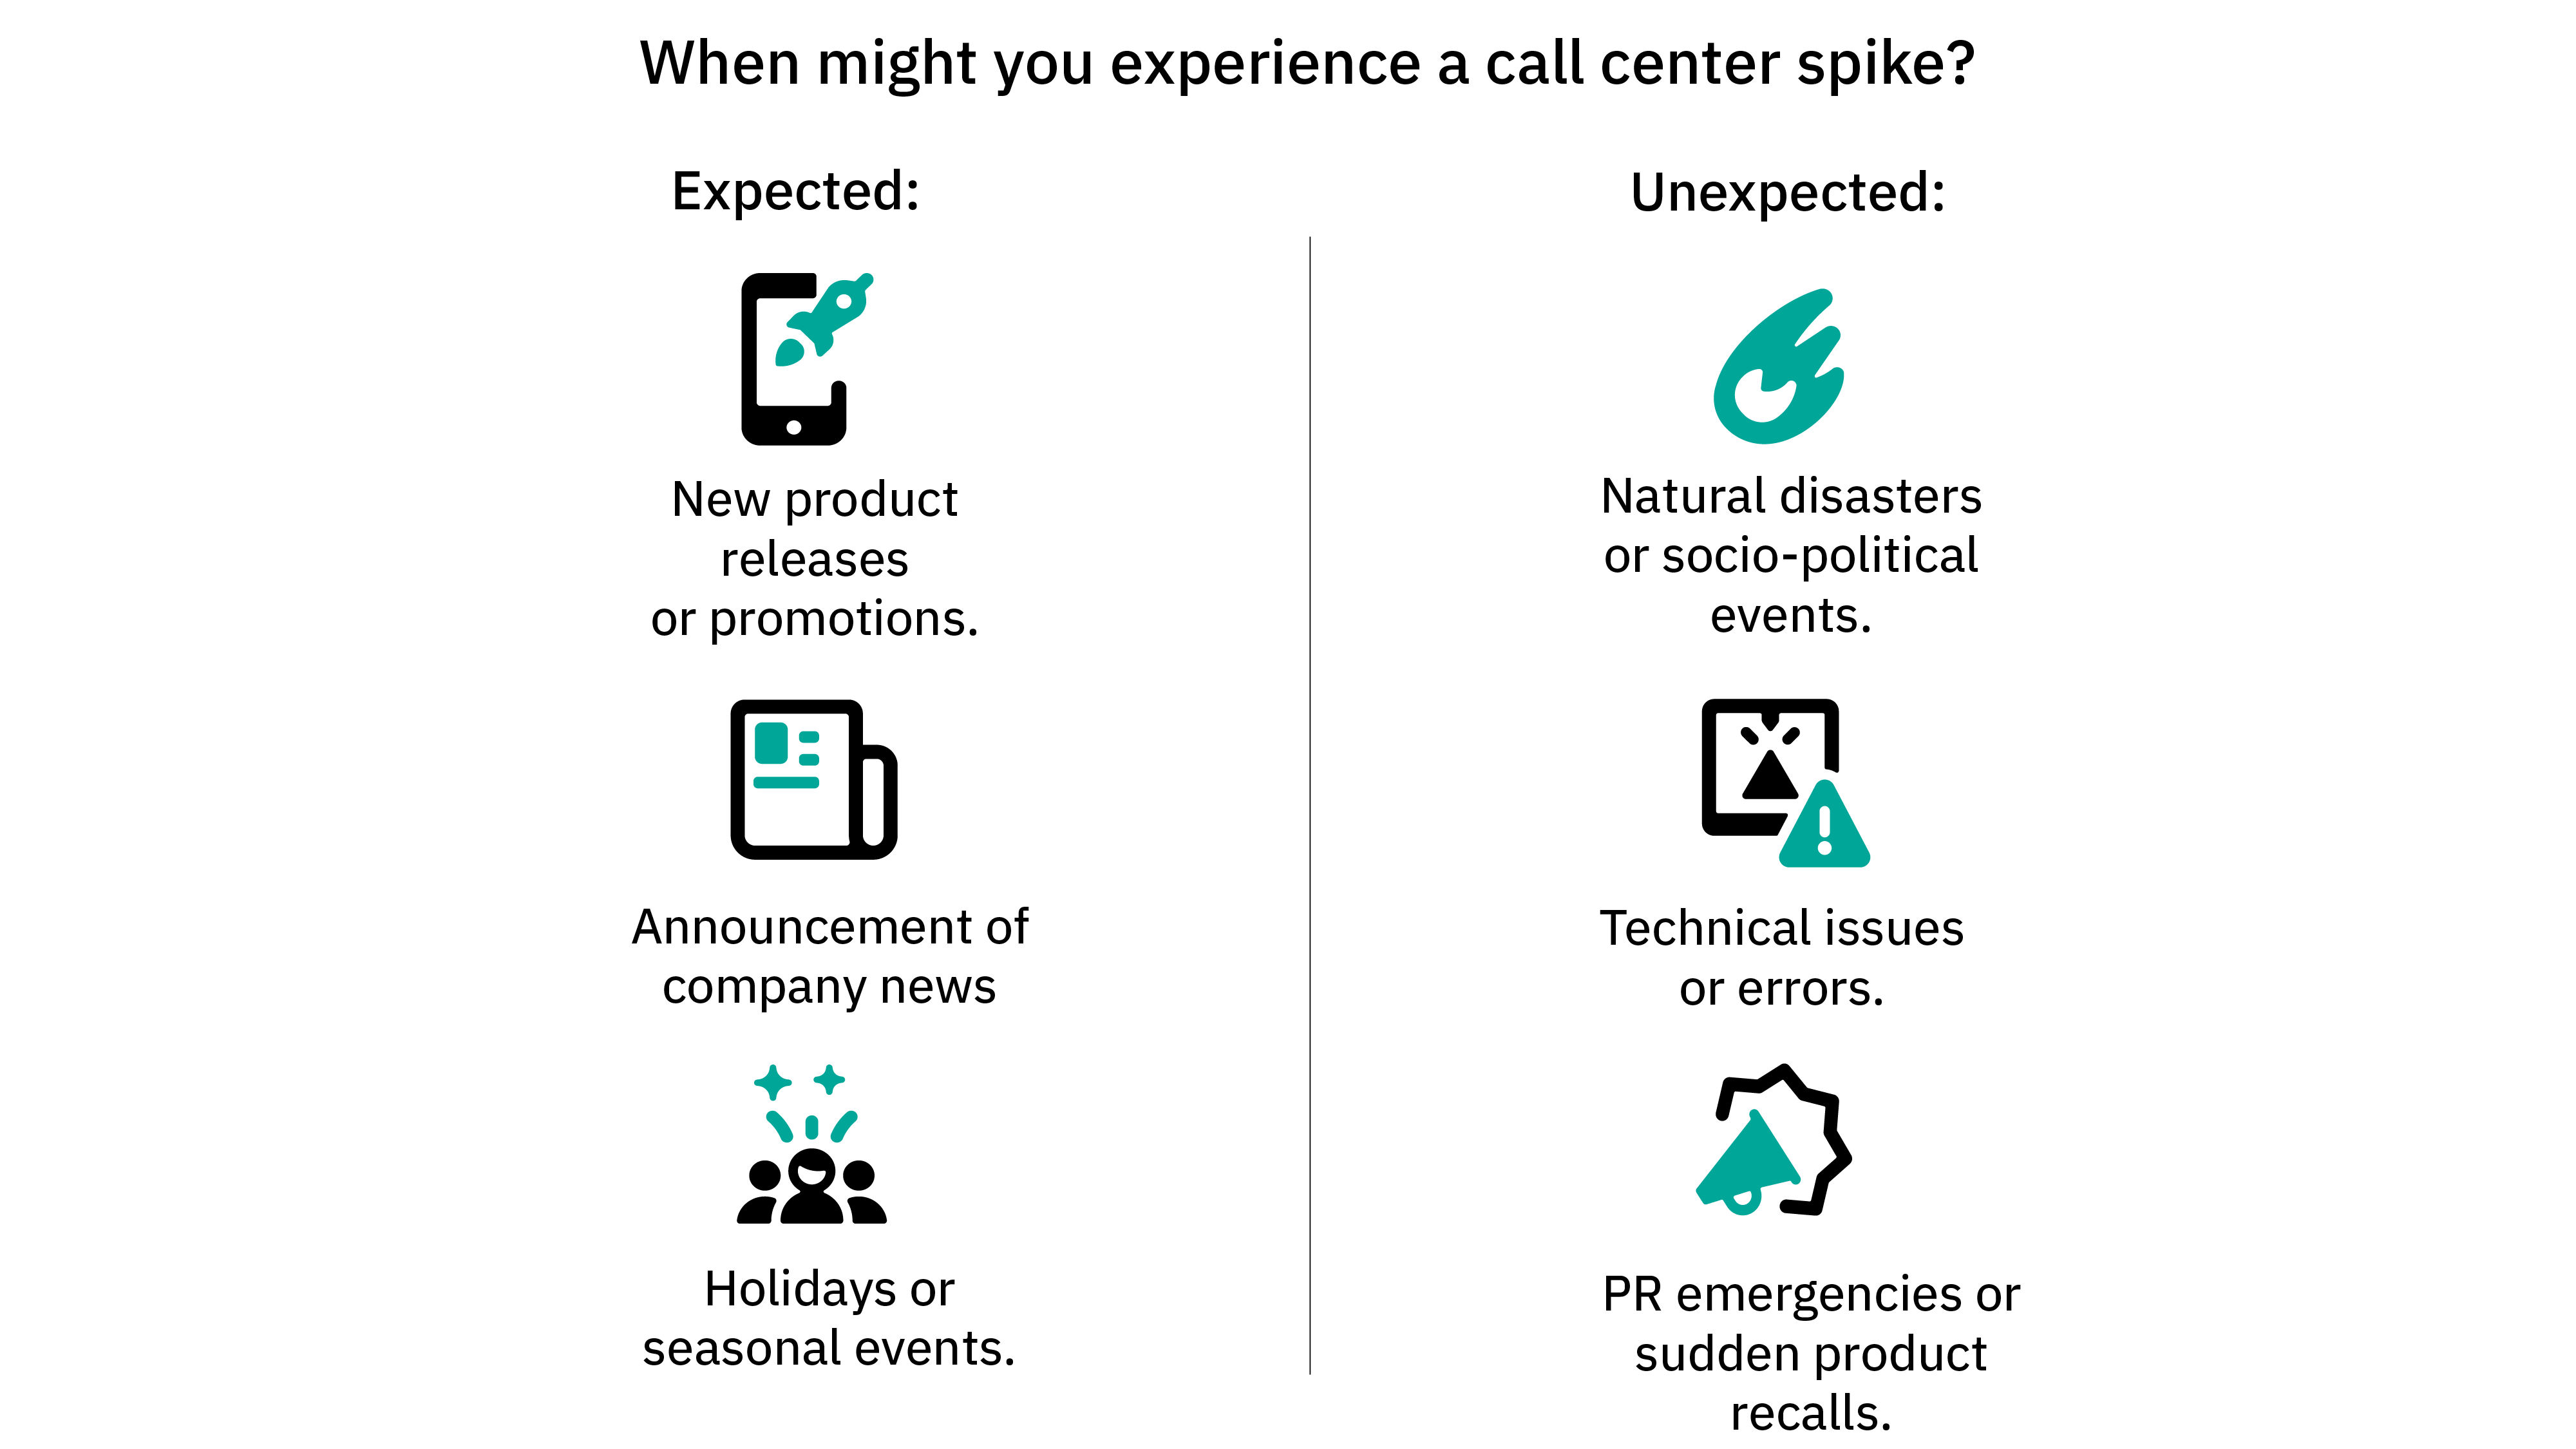 When might you experience a call center spike